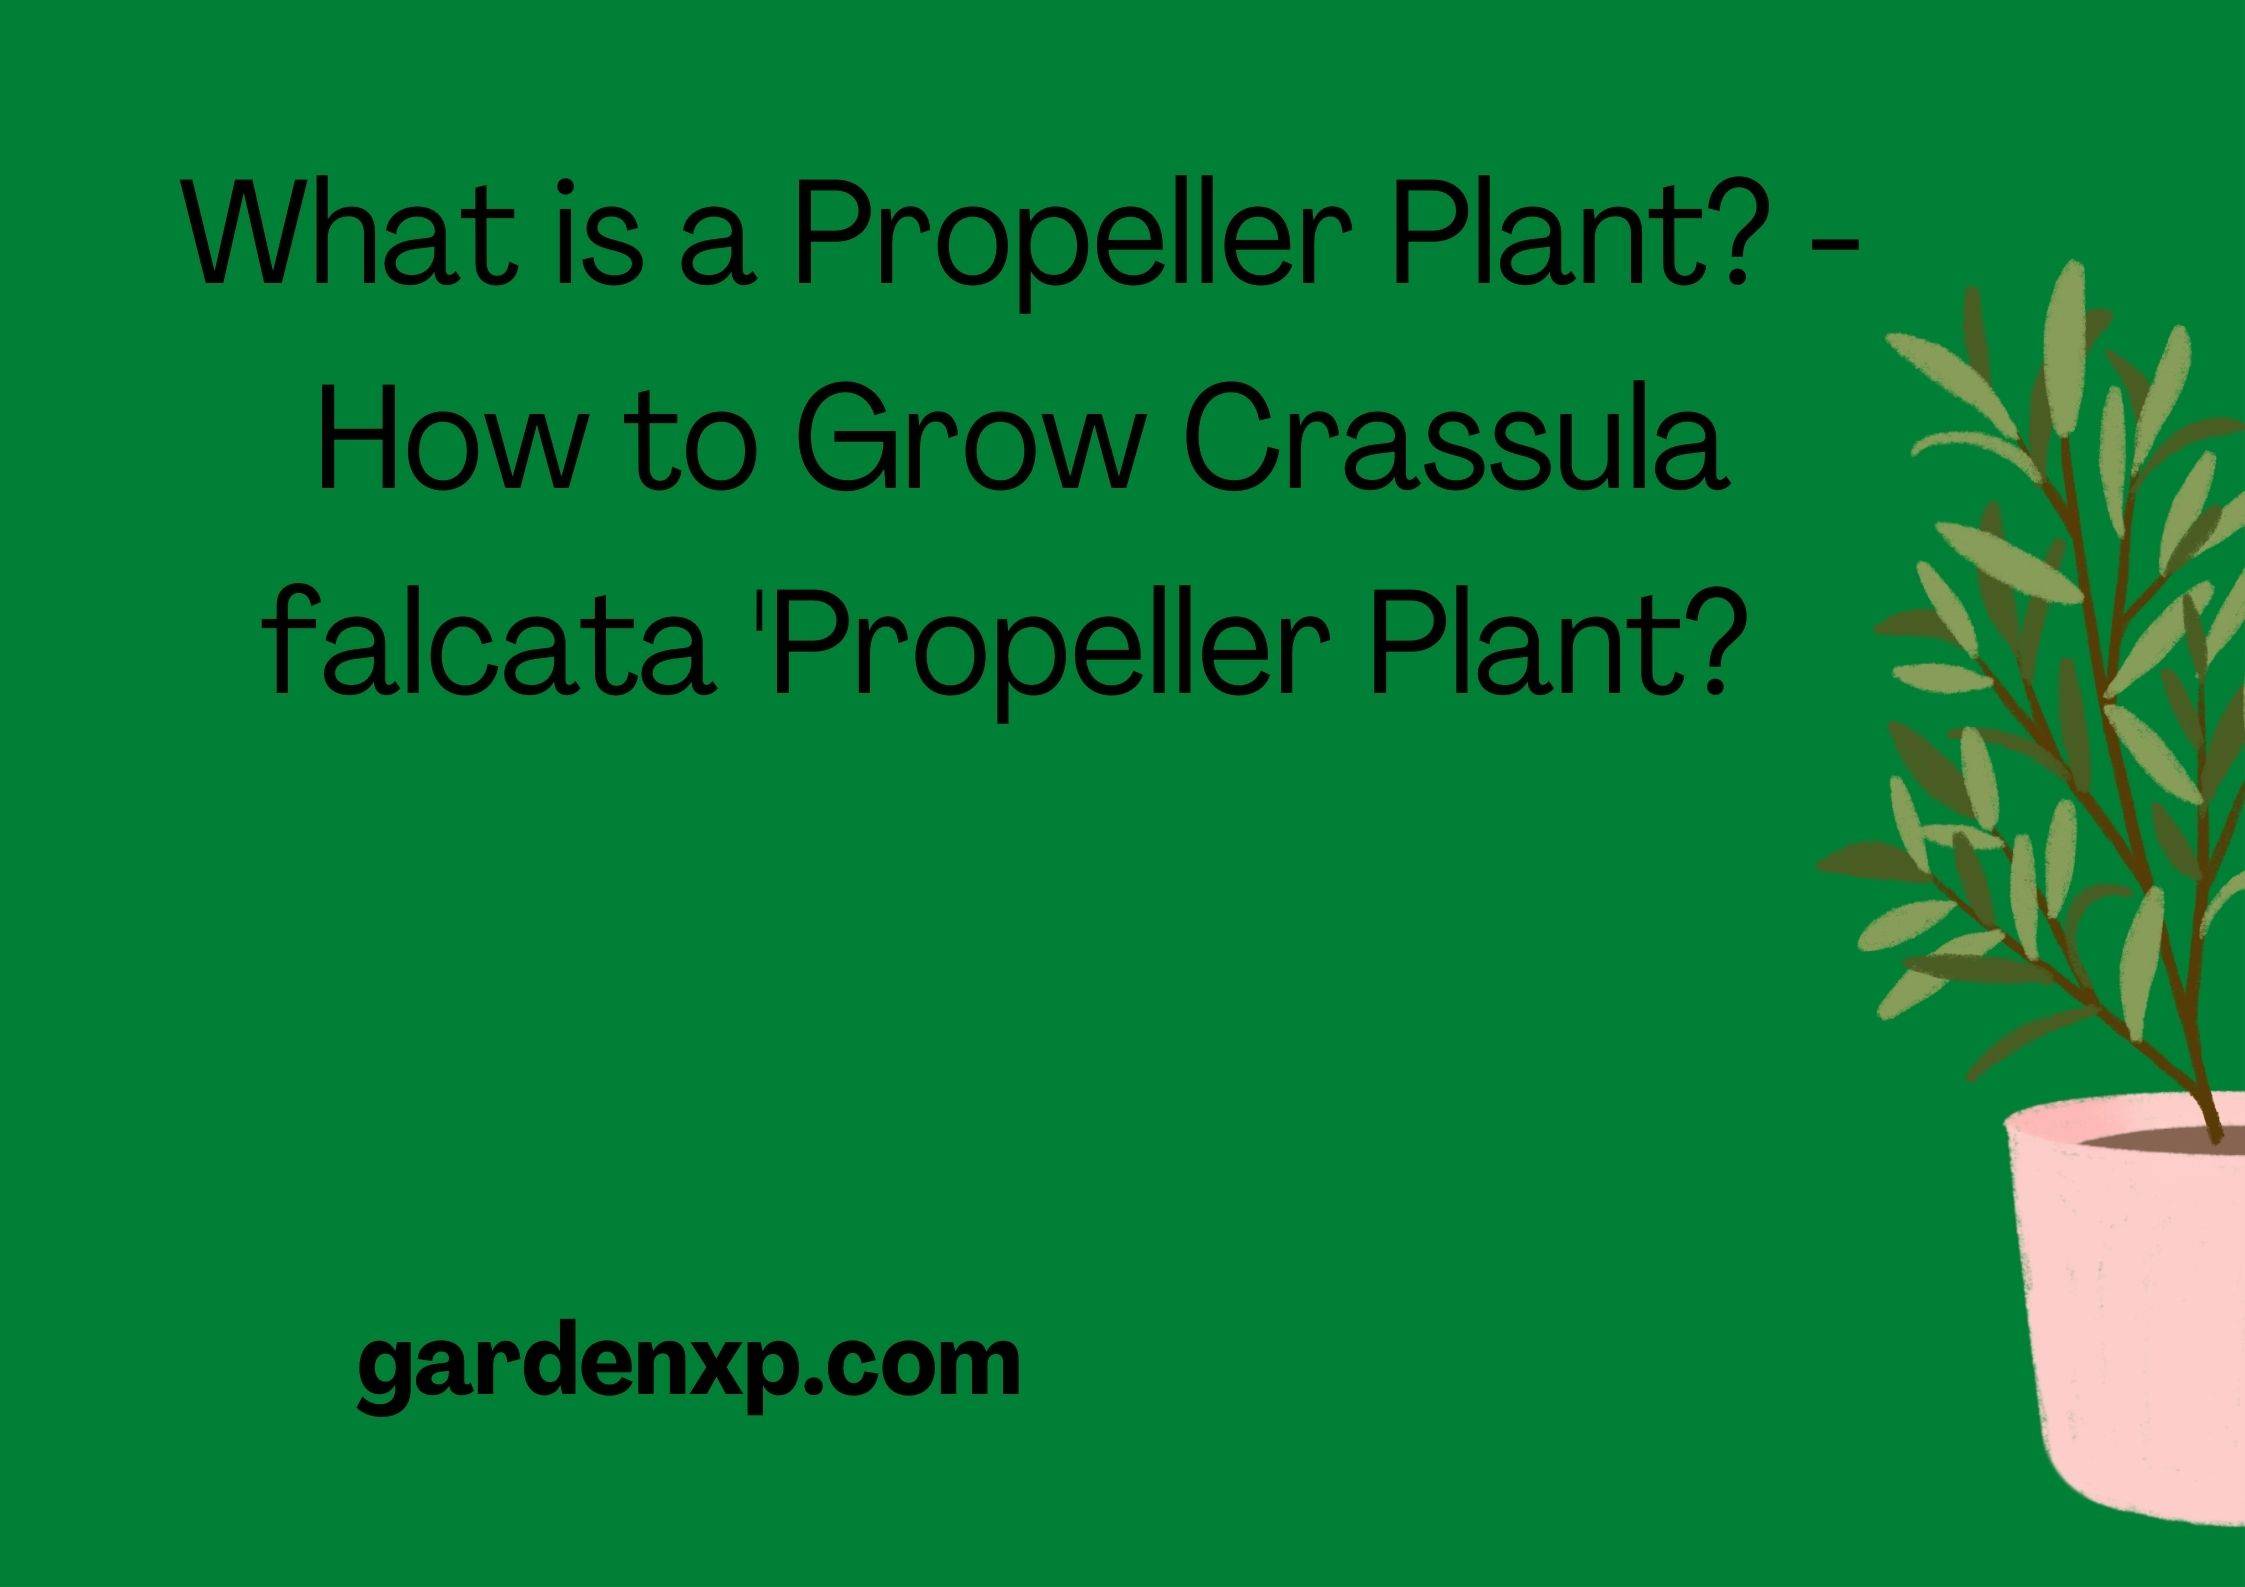 What is a Propeller Plant? - How to Grow Crassula falcata 'Propeller Plant? 